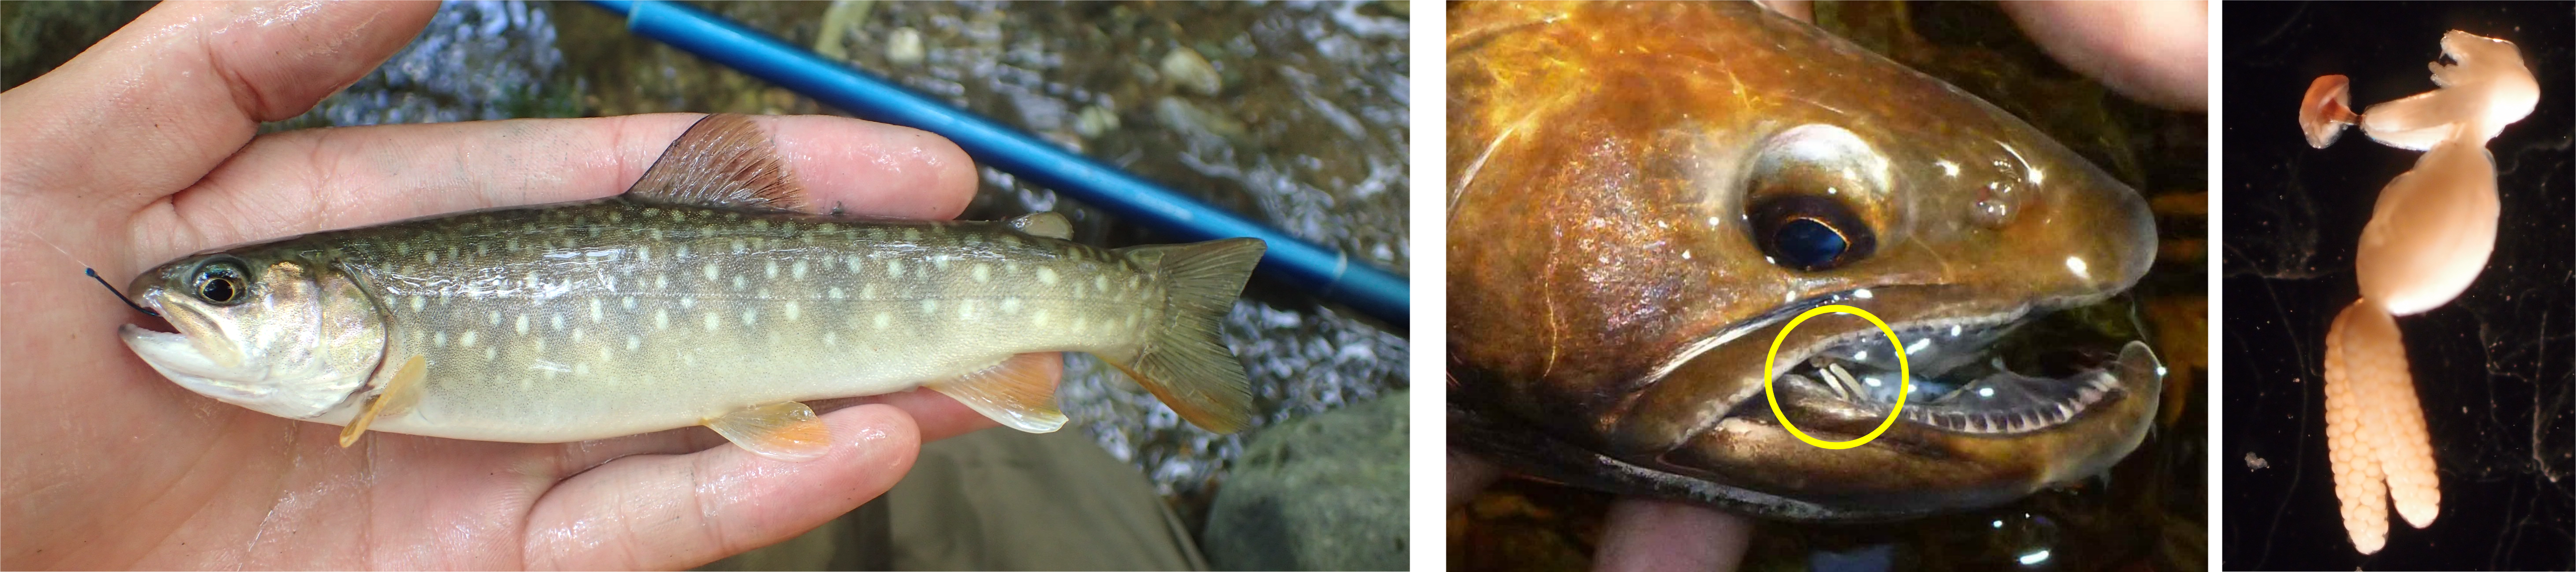 (Left) A whitespotted char caught by angling during the survey; the parasite (yellow circle) attached to the mouth of a whitespotted char (middle); and a light micrograph of the parasite (right). (Photos: Ryota Hasegawa, Itsuro Koizumi).